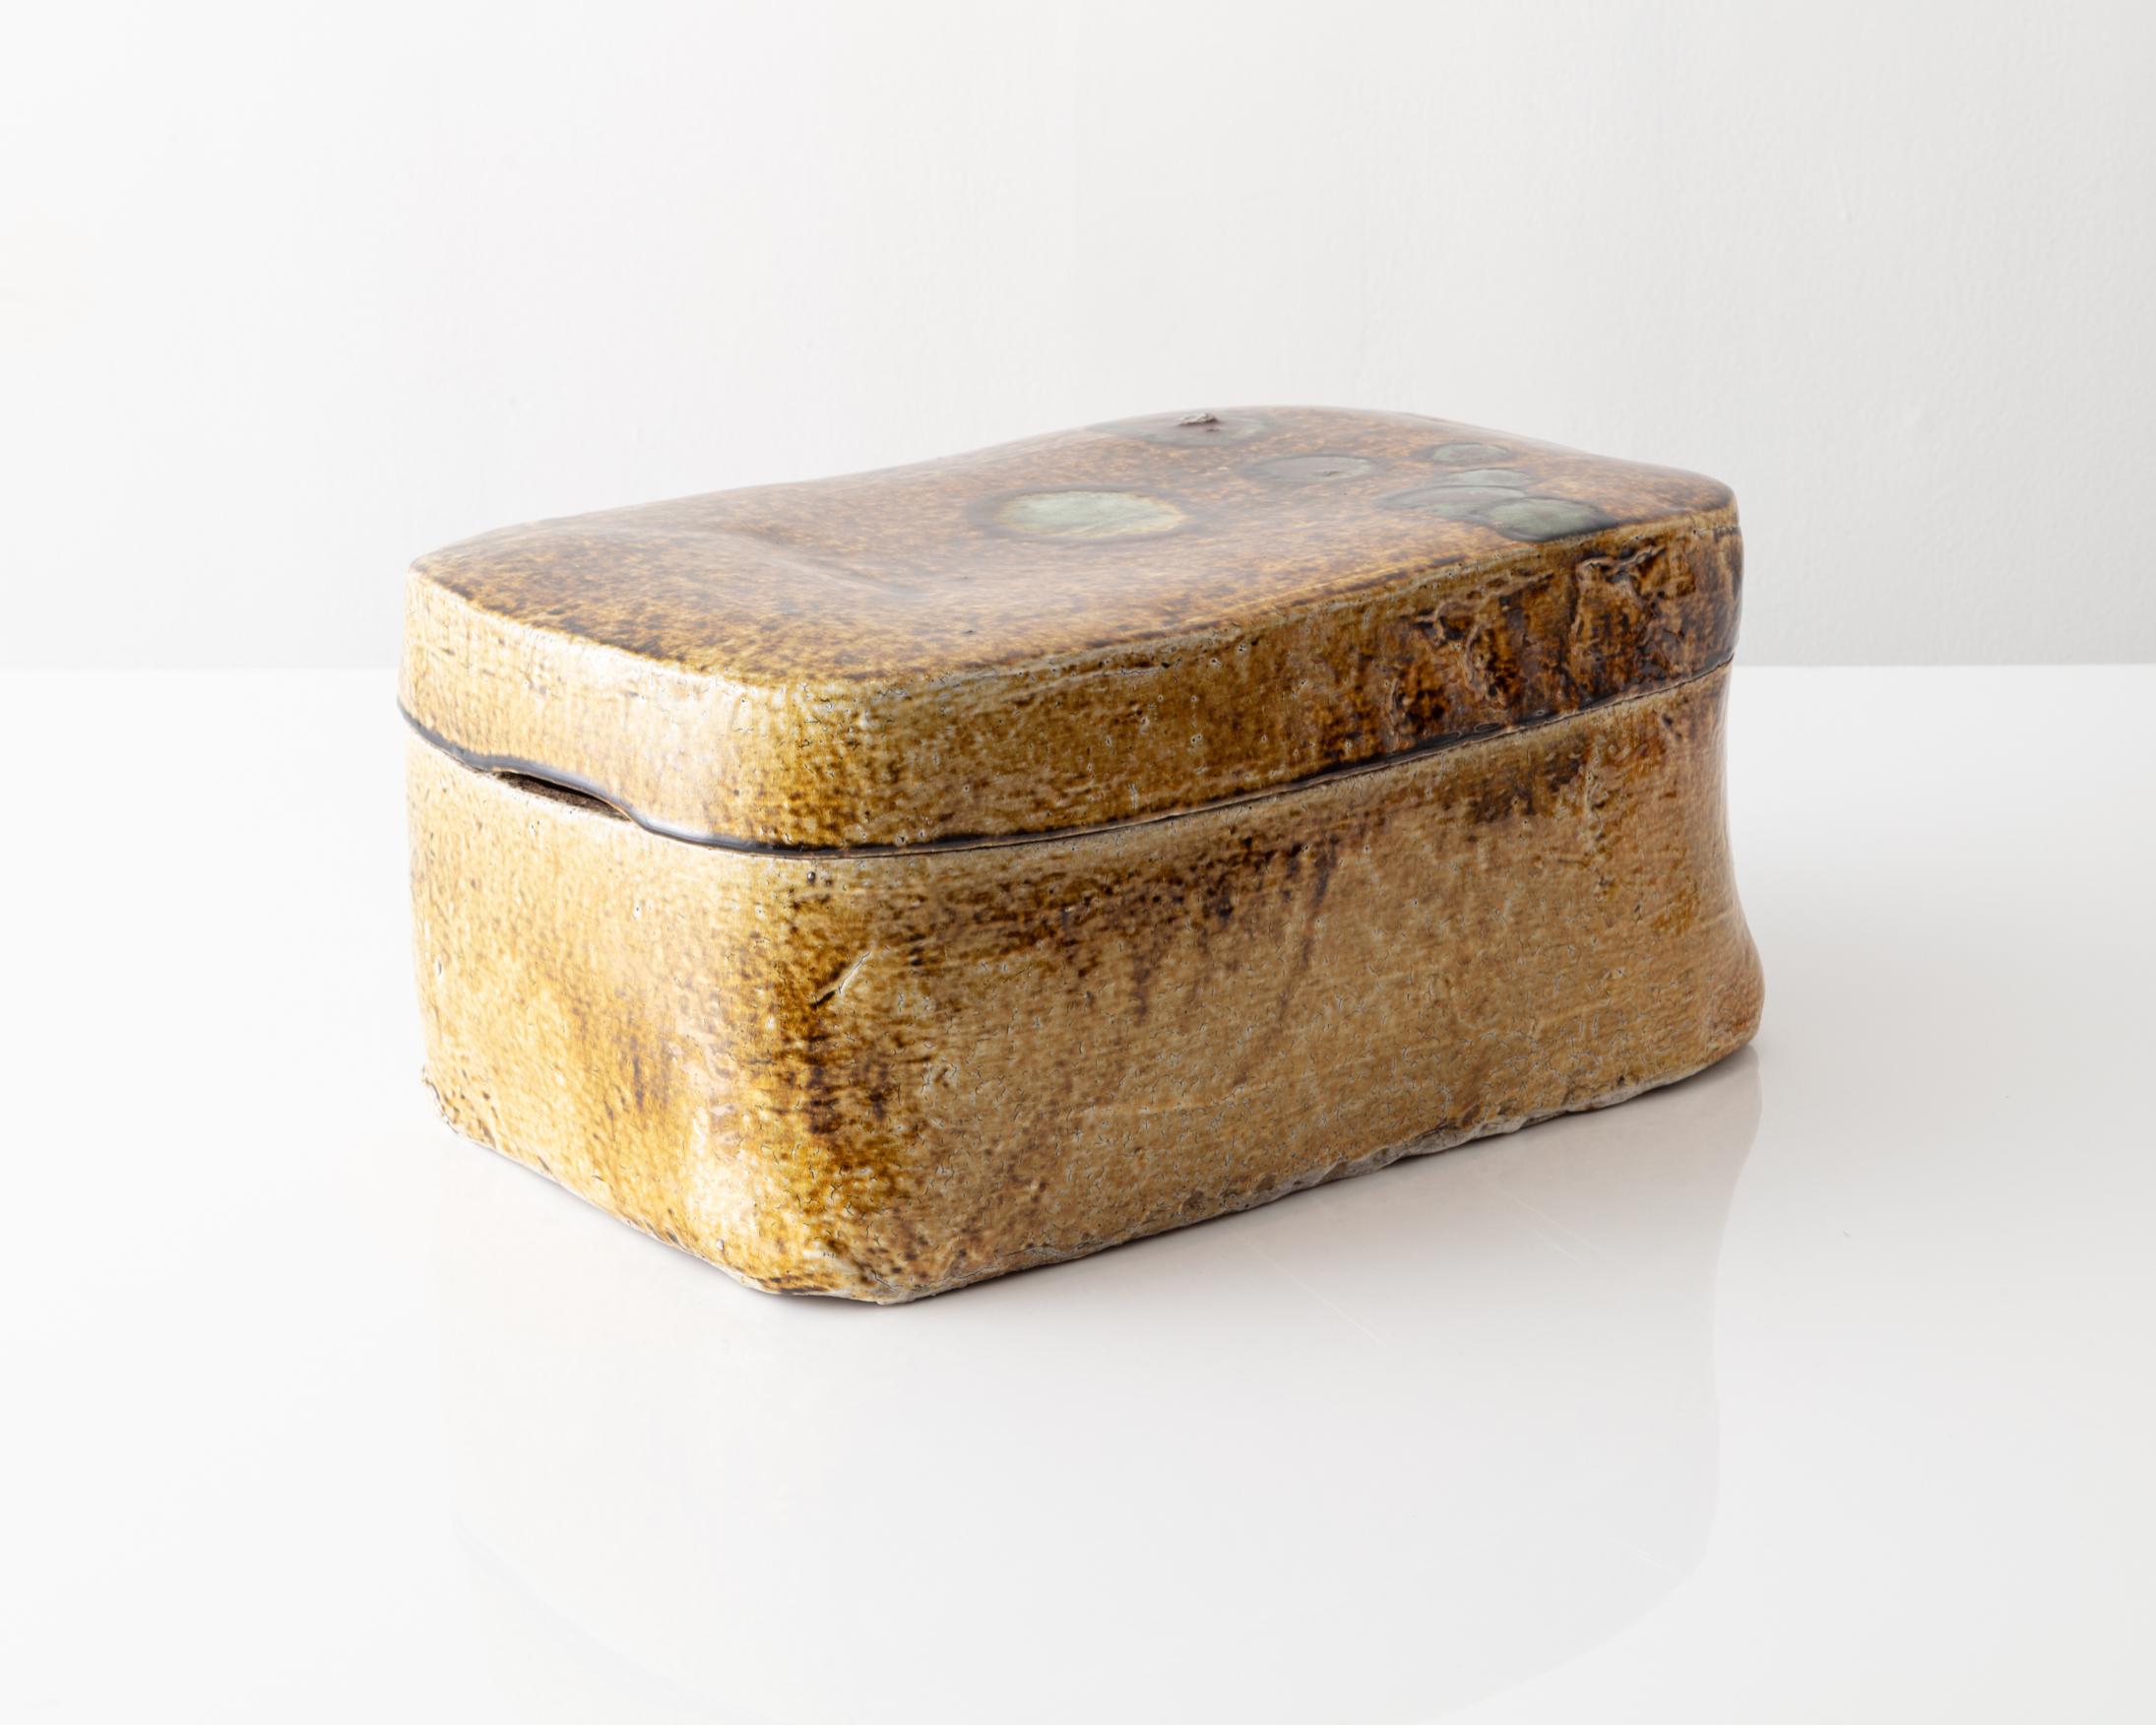 Modern Large Rectangular Ceramic Box with Lid in Golden Brown by Hun-Chung Lee, 2011